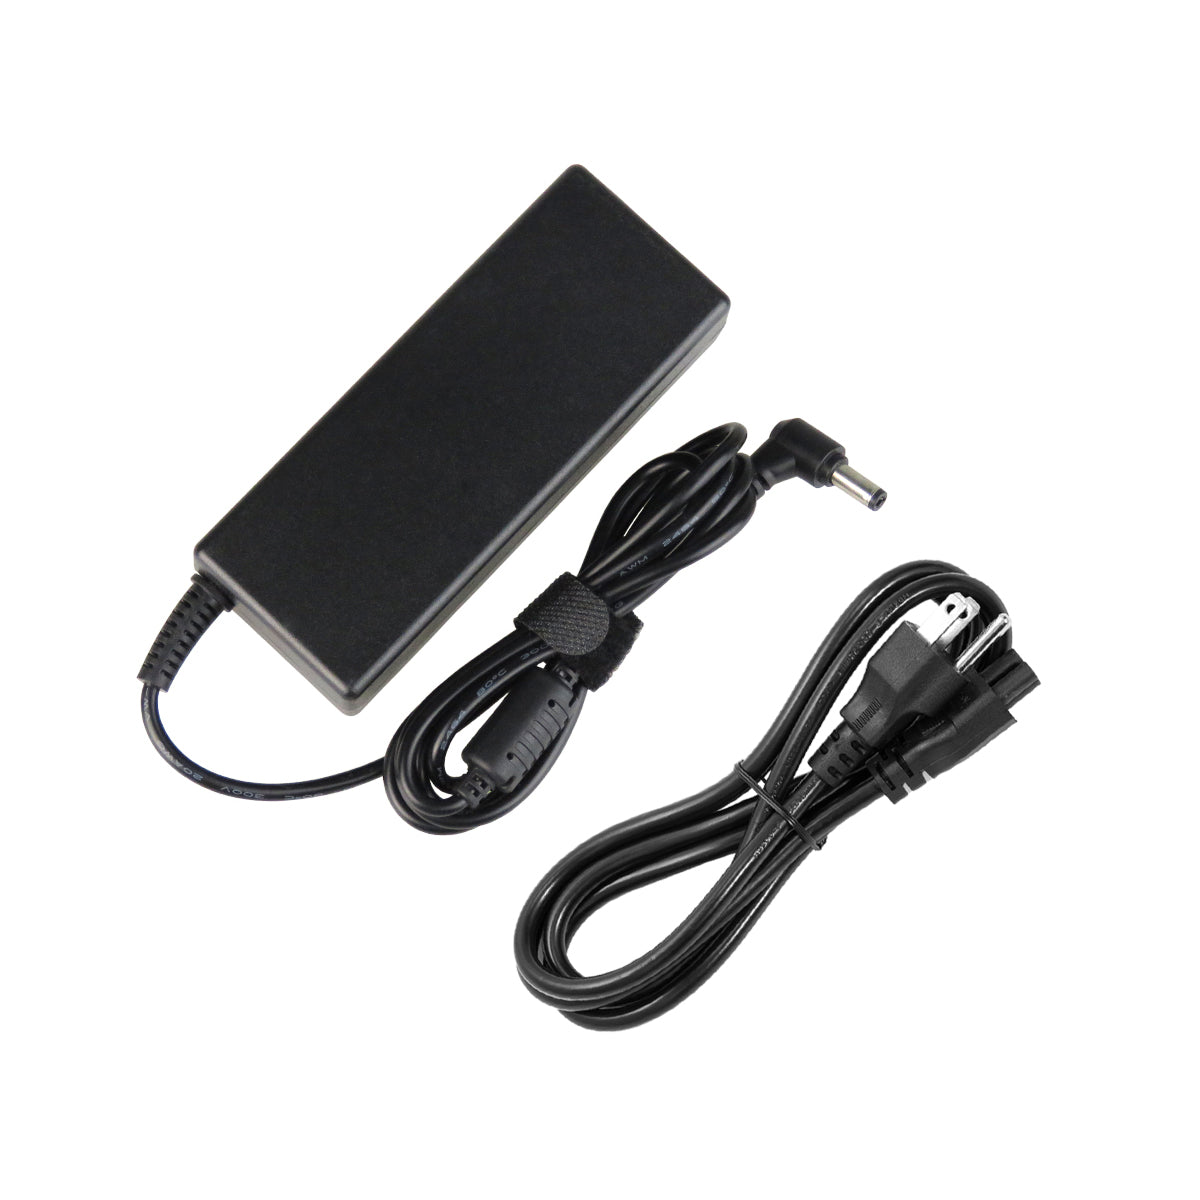 AC Adapter Charger for ASUS X73E Notebook.